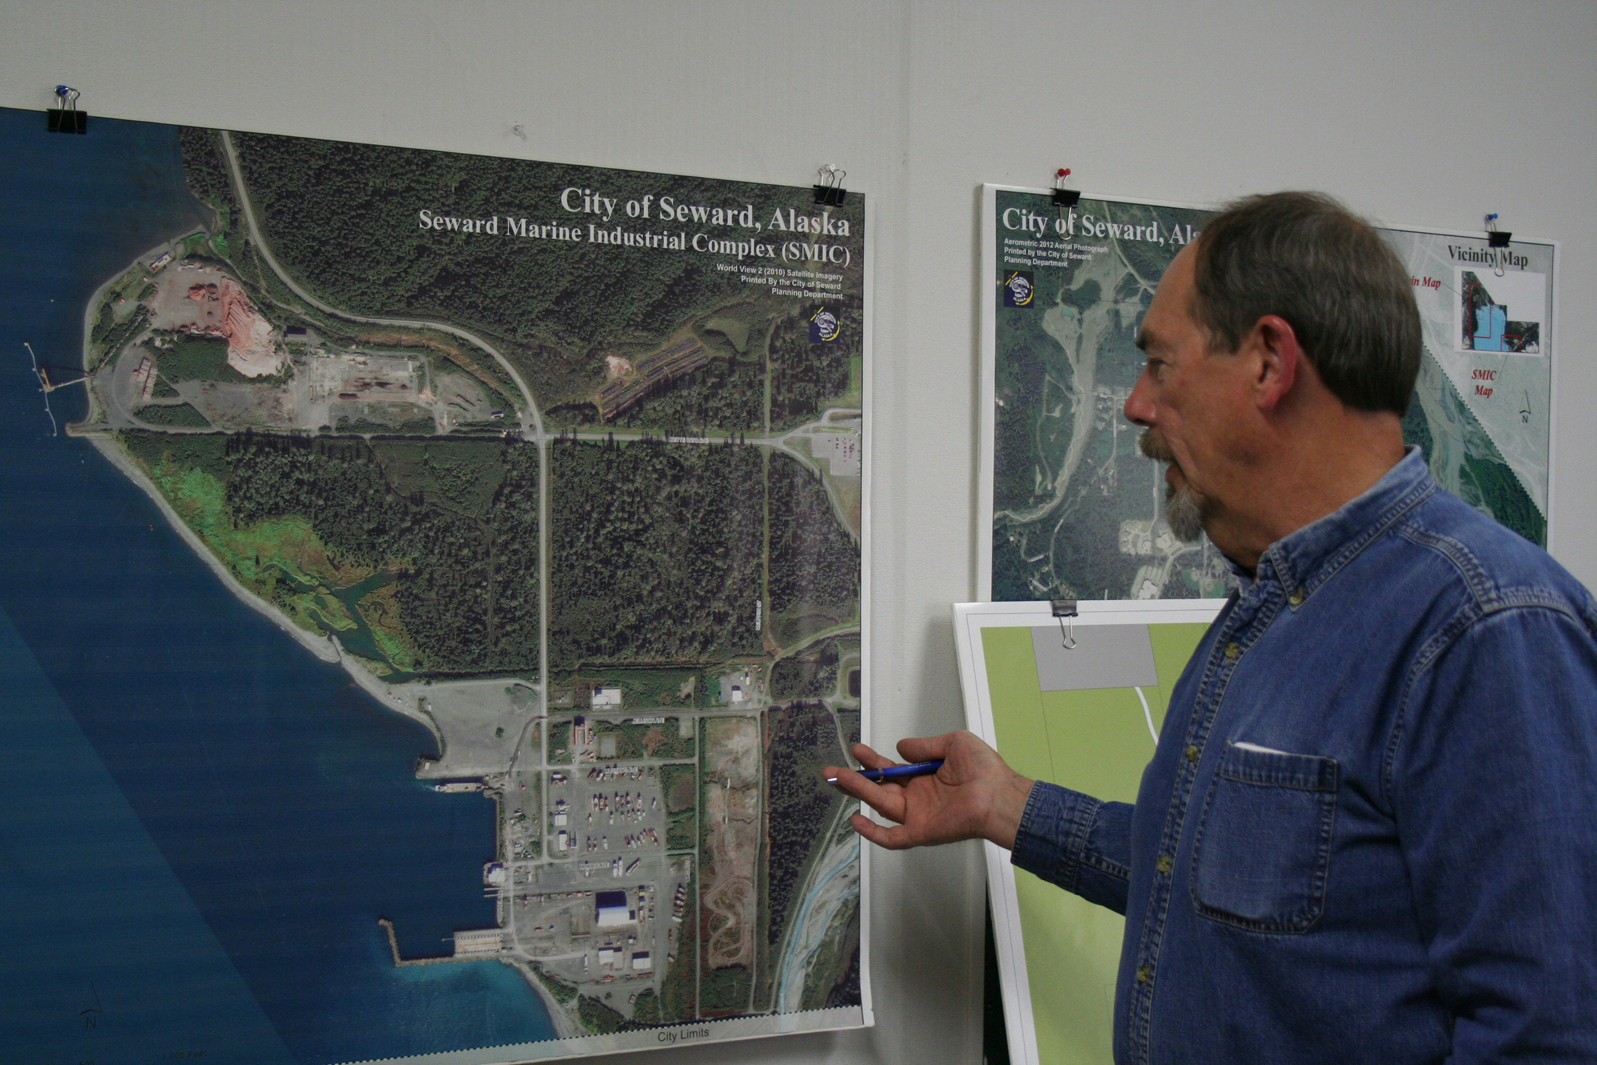 Seward Community Development Director Ron Long discusses the city’s plans for the Seward Marine Industrial Center across Resurrection Bay from its population center in front of a photo of the shipyard and surrounding area.